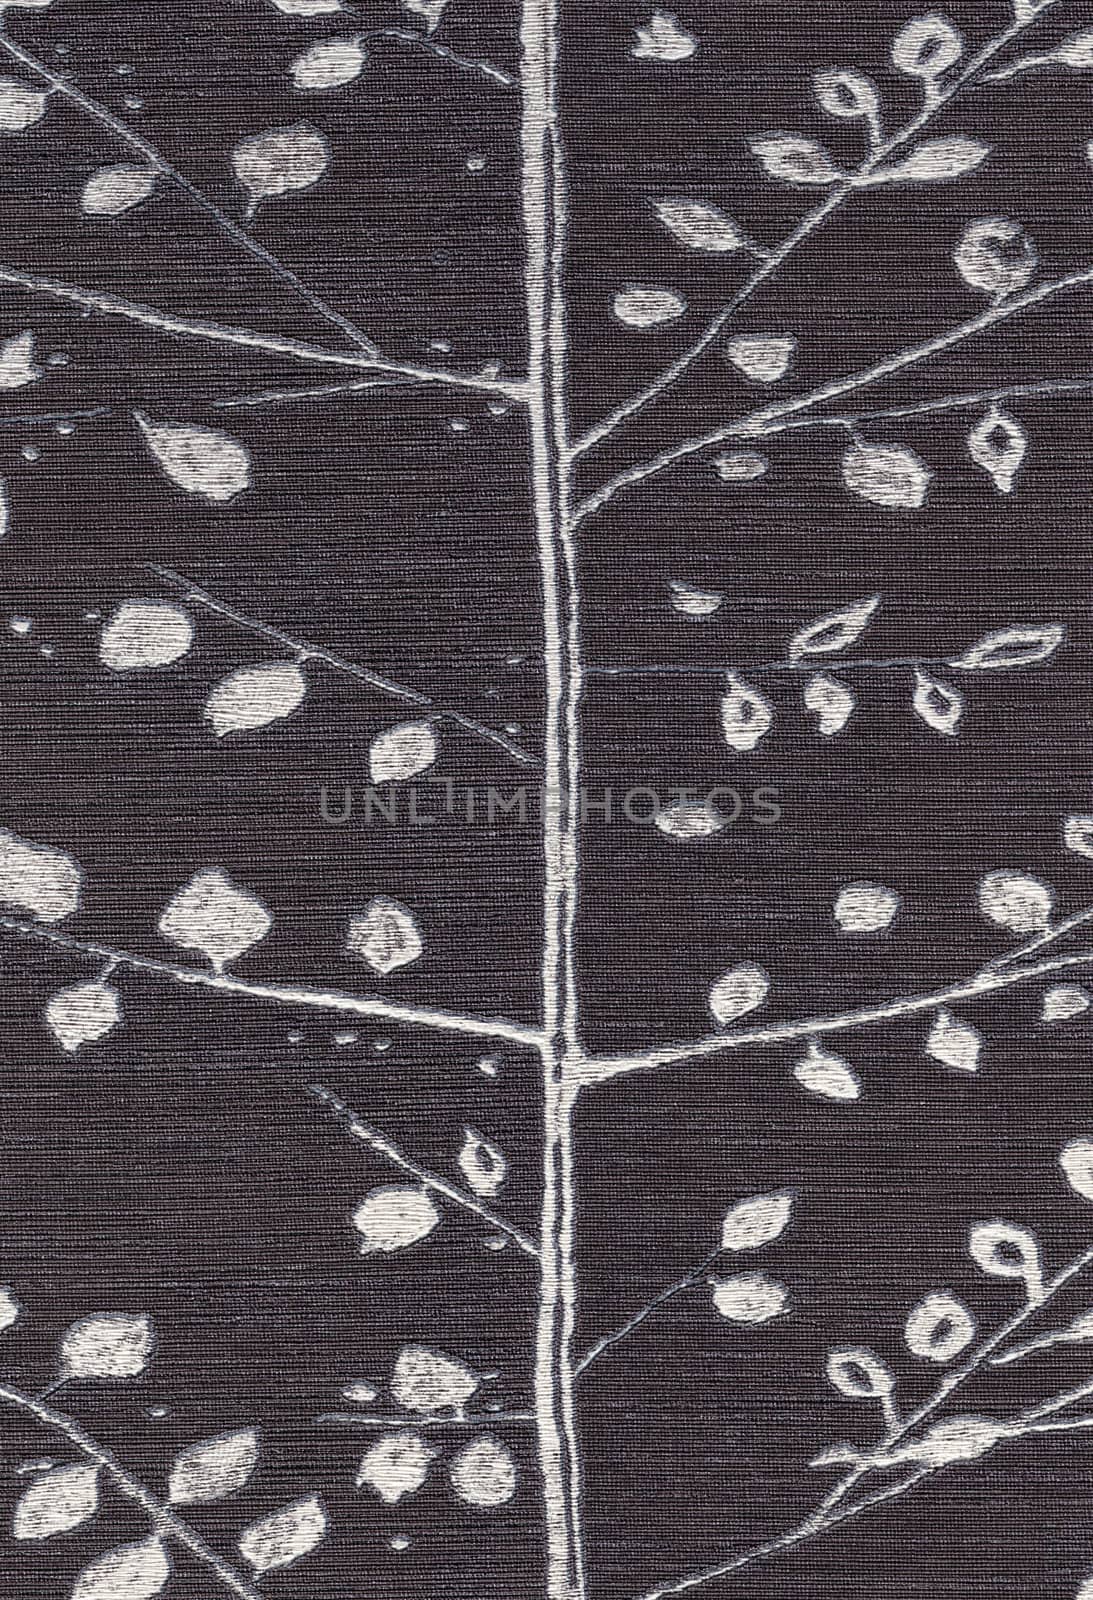 Branch pattern fabric texture. (High.res.scan.) by mg1408